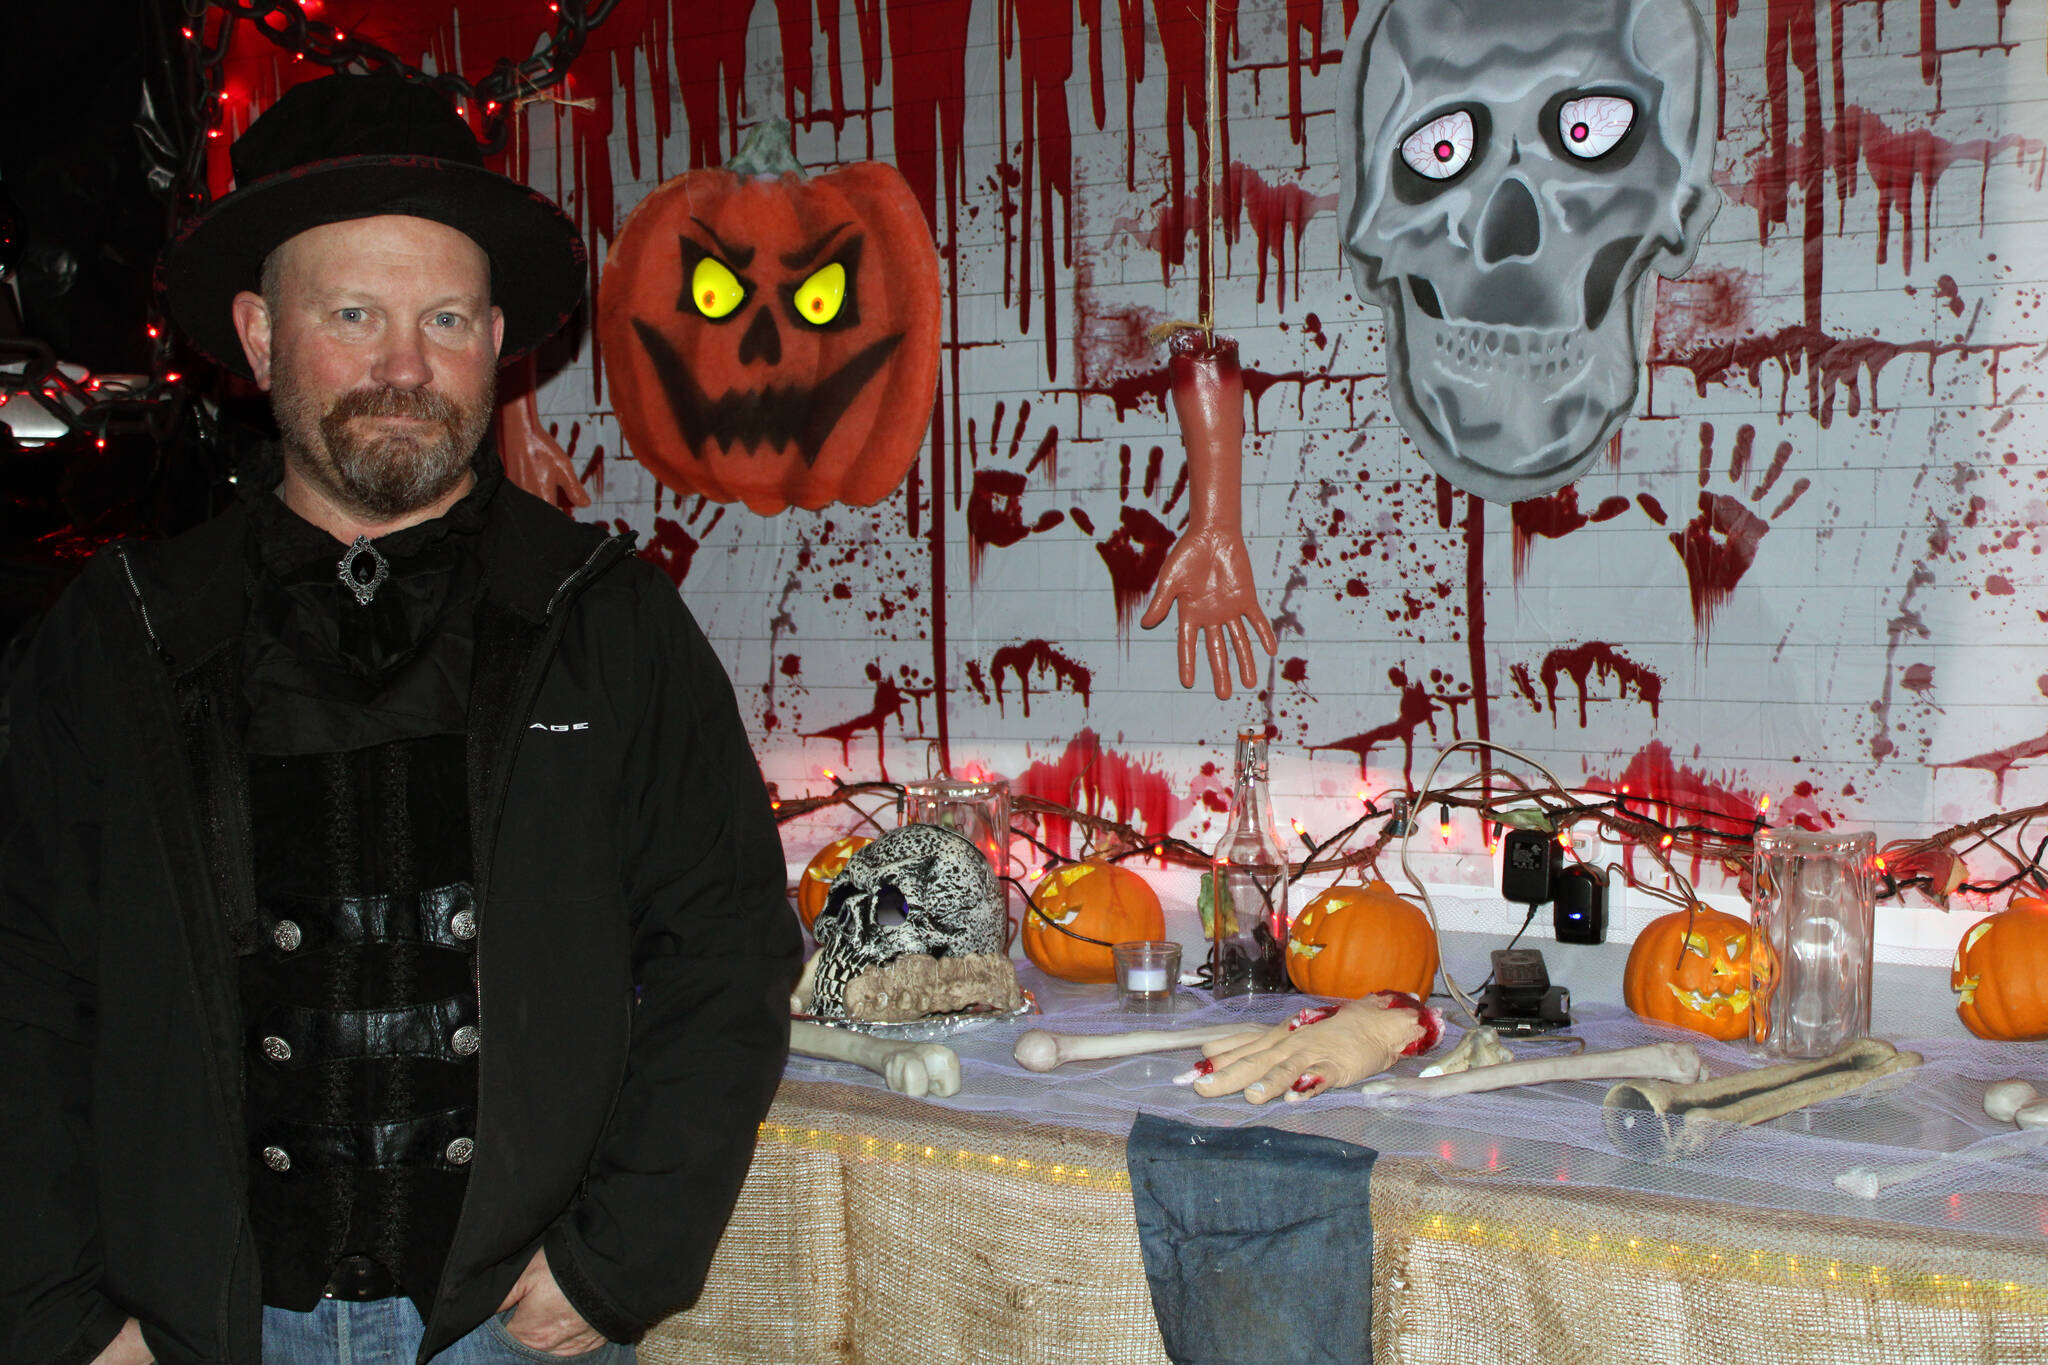 Dan Earls shows off some of the scenes on display at Earls' Haunted Garage. On Oct. 28, he was adding finishing touches to his display in anticipation of thrill-seekers who will stop by for a scare over Halloween weekend. His haunted garage resulted in 1,563 pounds of donated food headed to local food banks. (Dana Zigmund/Juneau Empire)